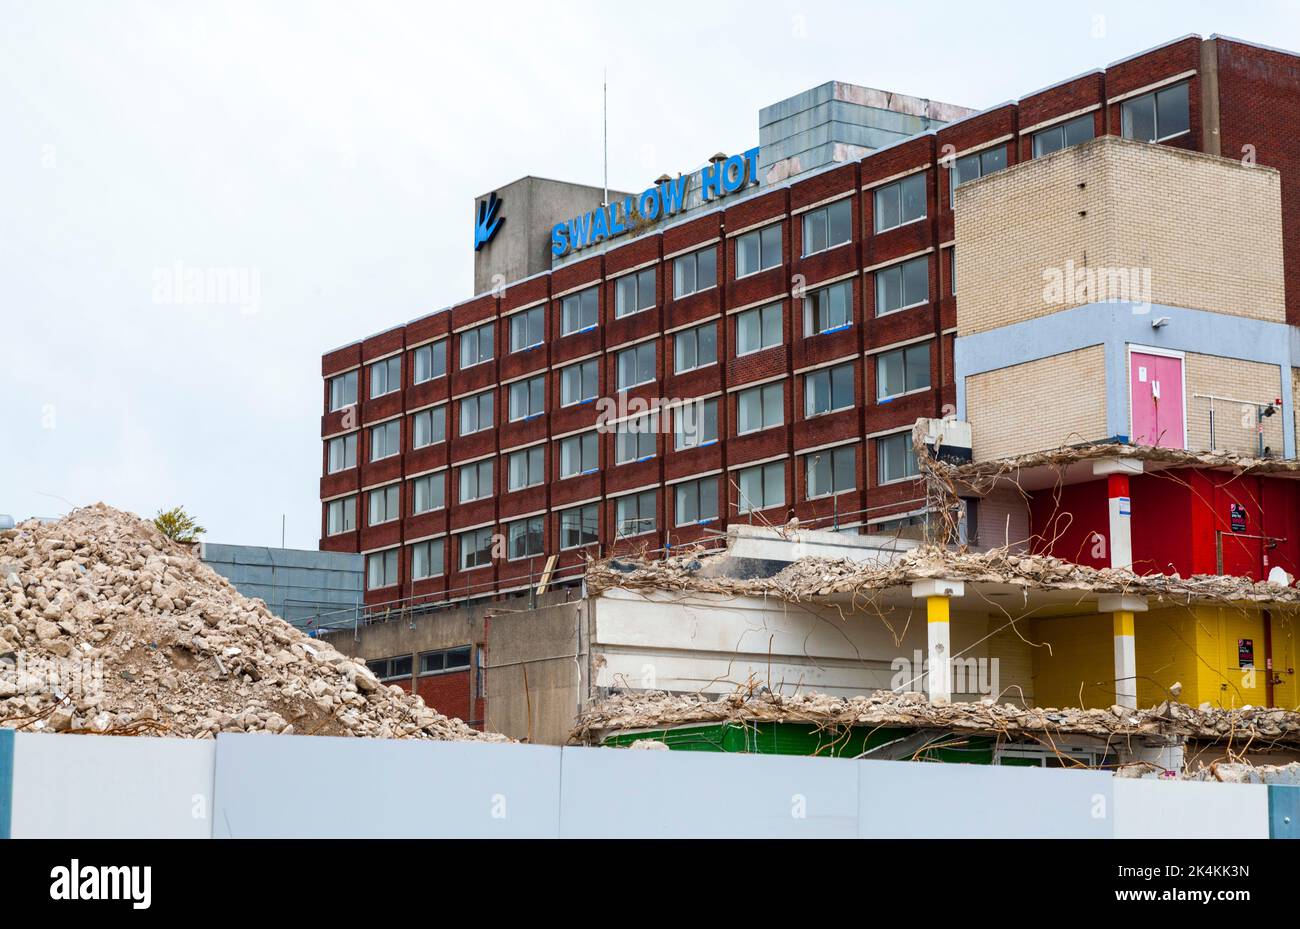 Stockton on Tees, UK.3rd October 2022. Demolition work has started on the Castlegate Centre as part of the Councils plans to open up the High Street to the riverside. David Dixon / Alamy Stock Photo